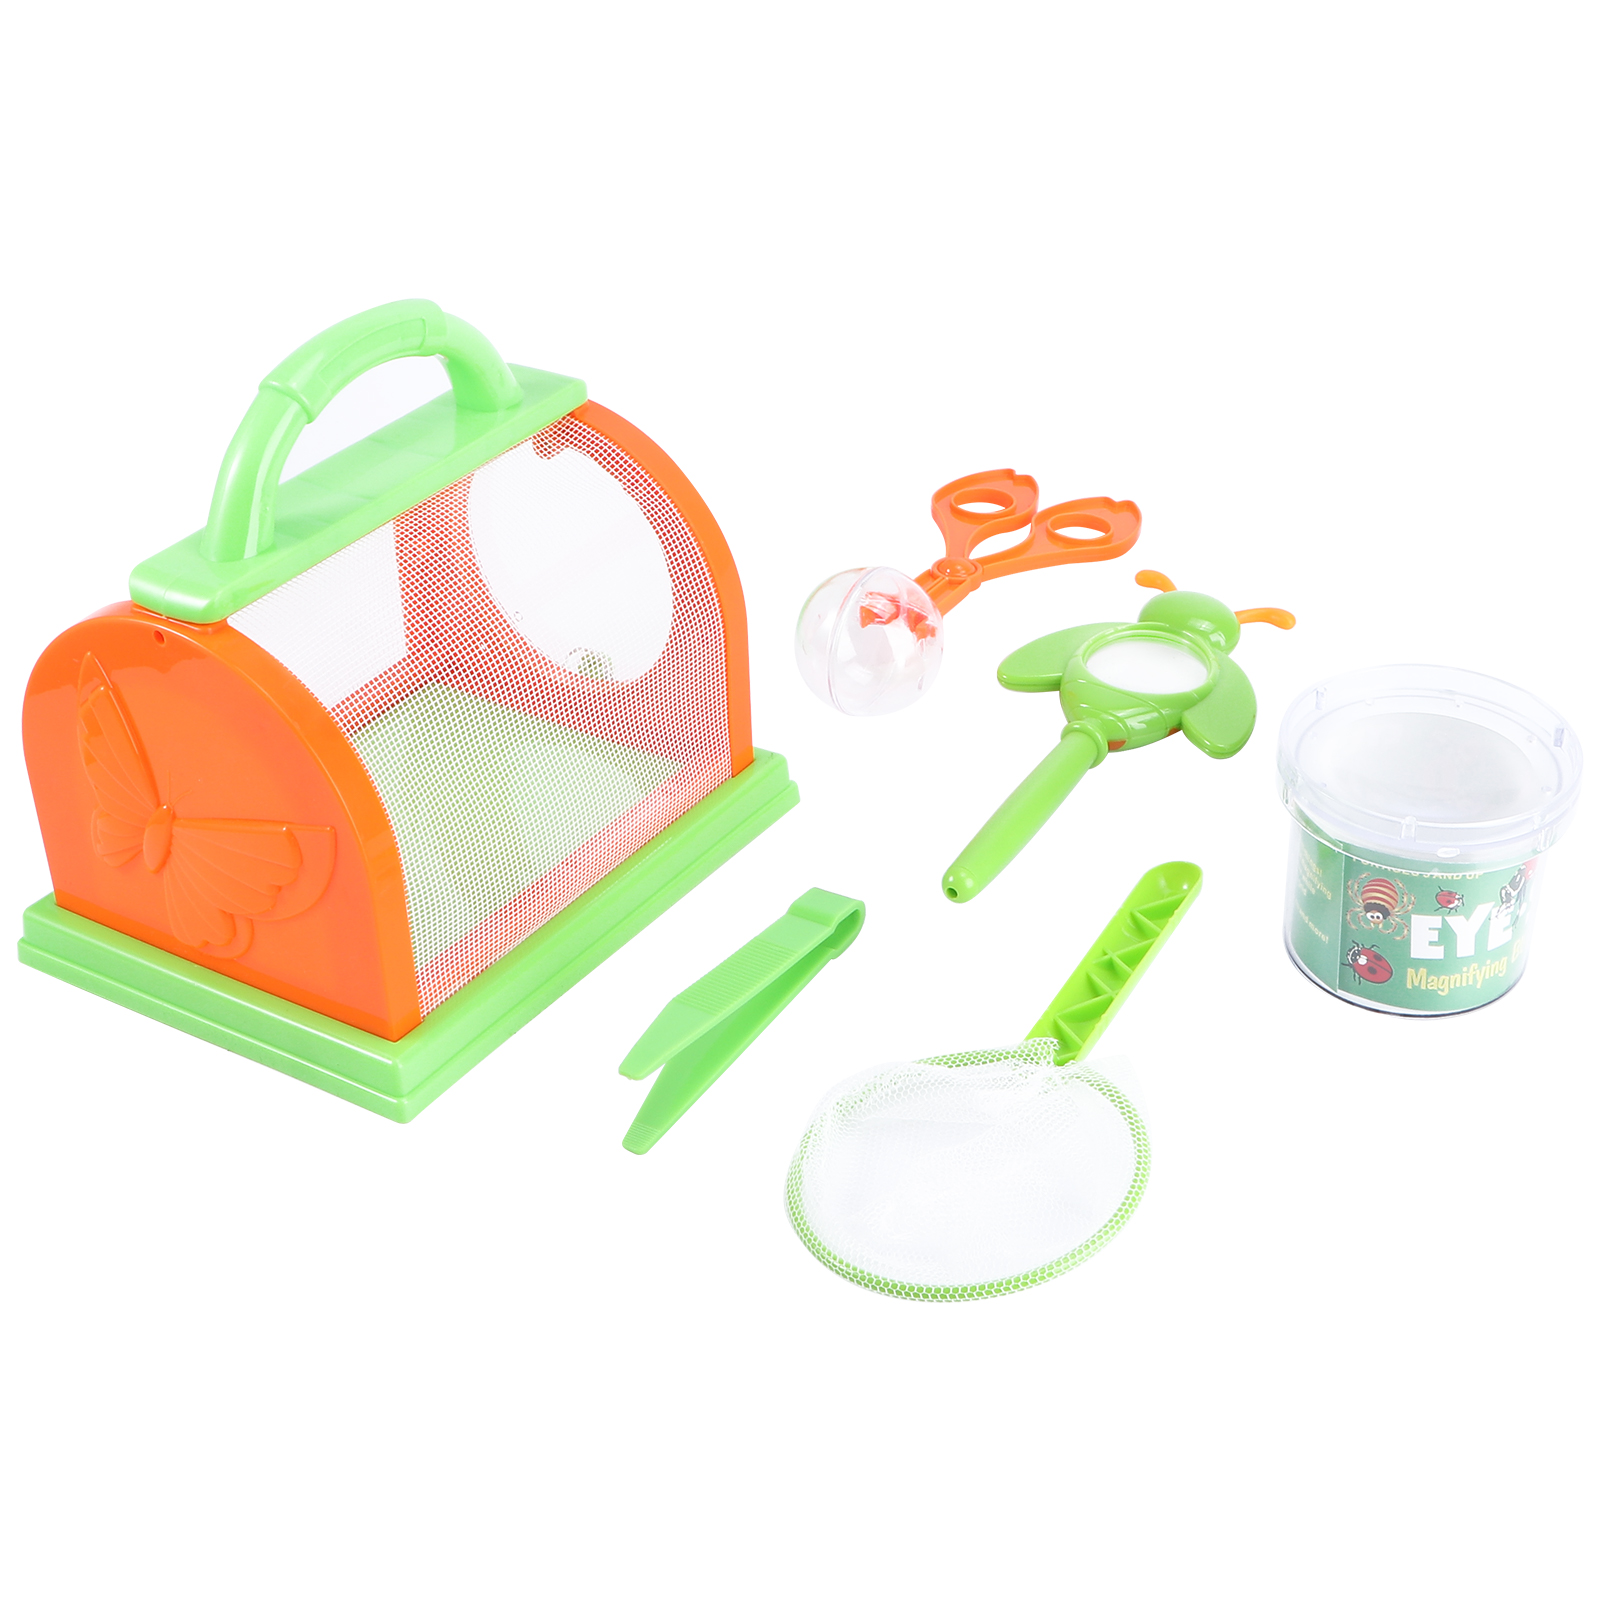 Kids Outdoor Explorer Kit Bug Catcher Kit Insect Bug Viewer with Insect Net  Magnifier Tweezers Nature Outdoor Adventure Xmas Toys for Boys Girls Age  3-12 Year Old Children Birthday Gifts Education Toy